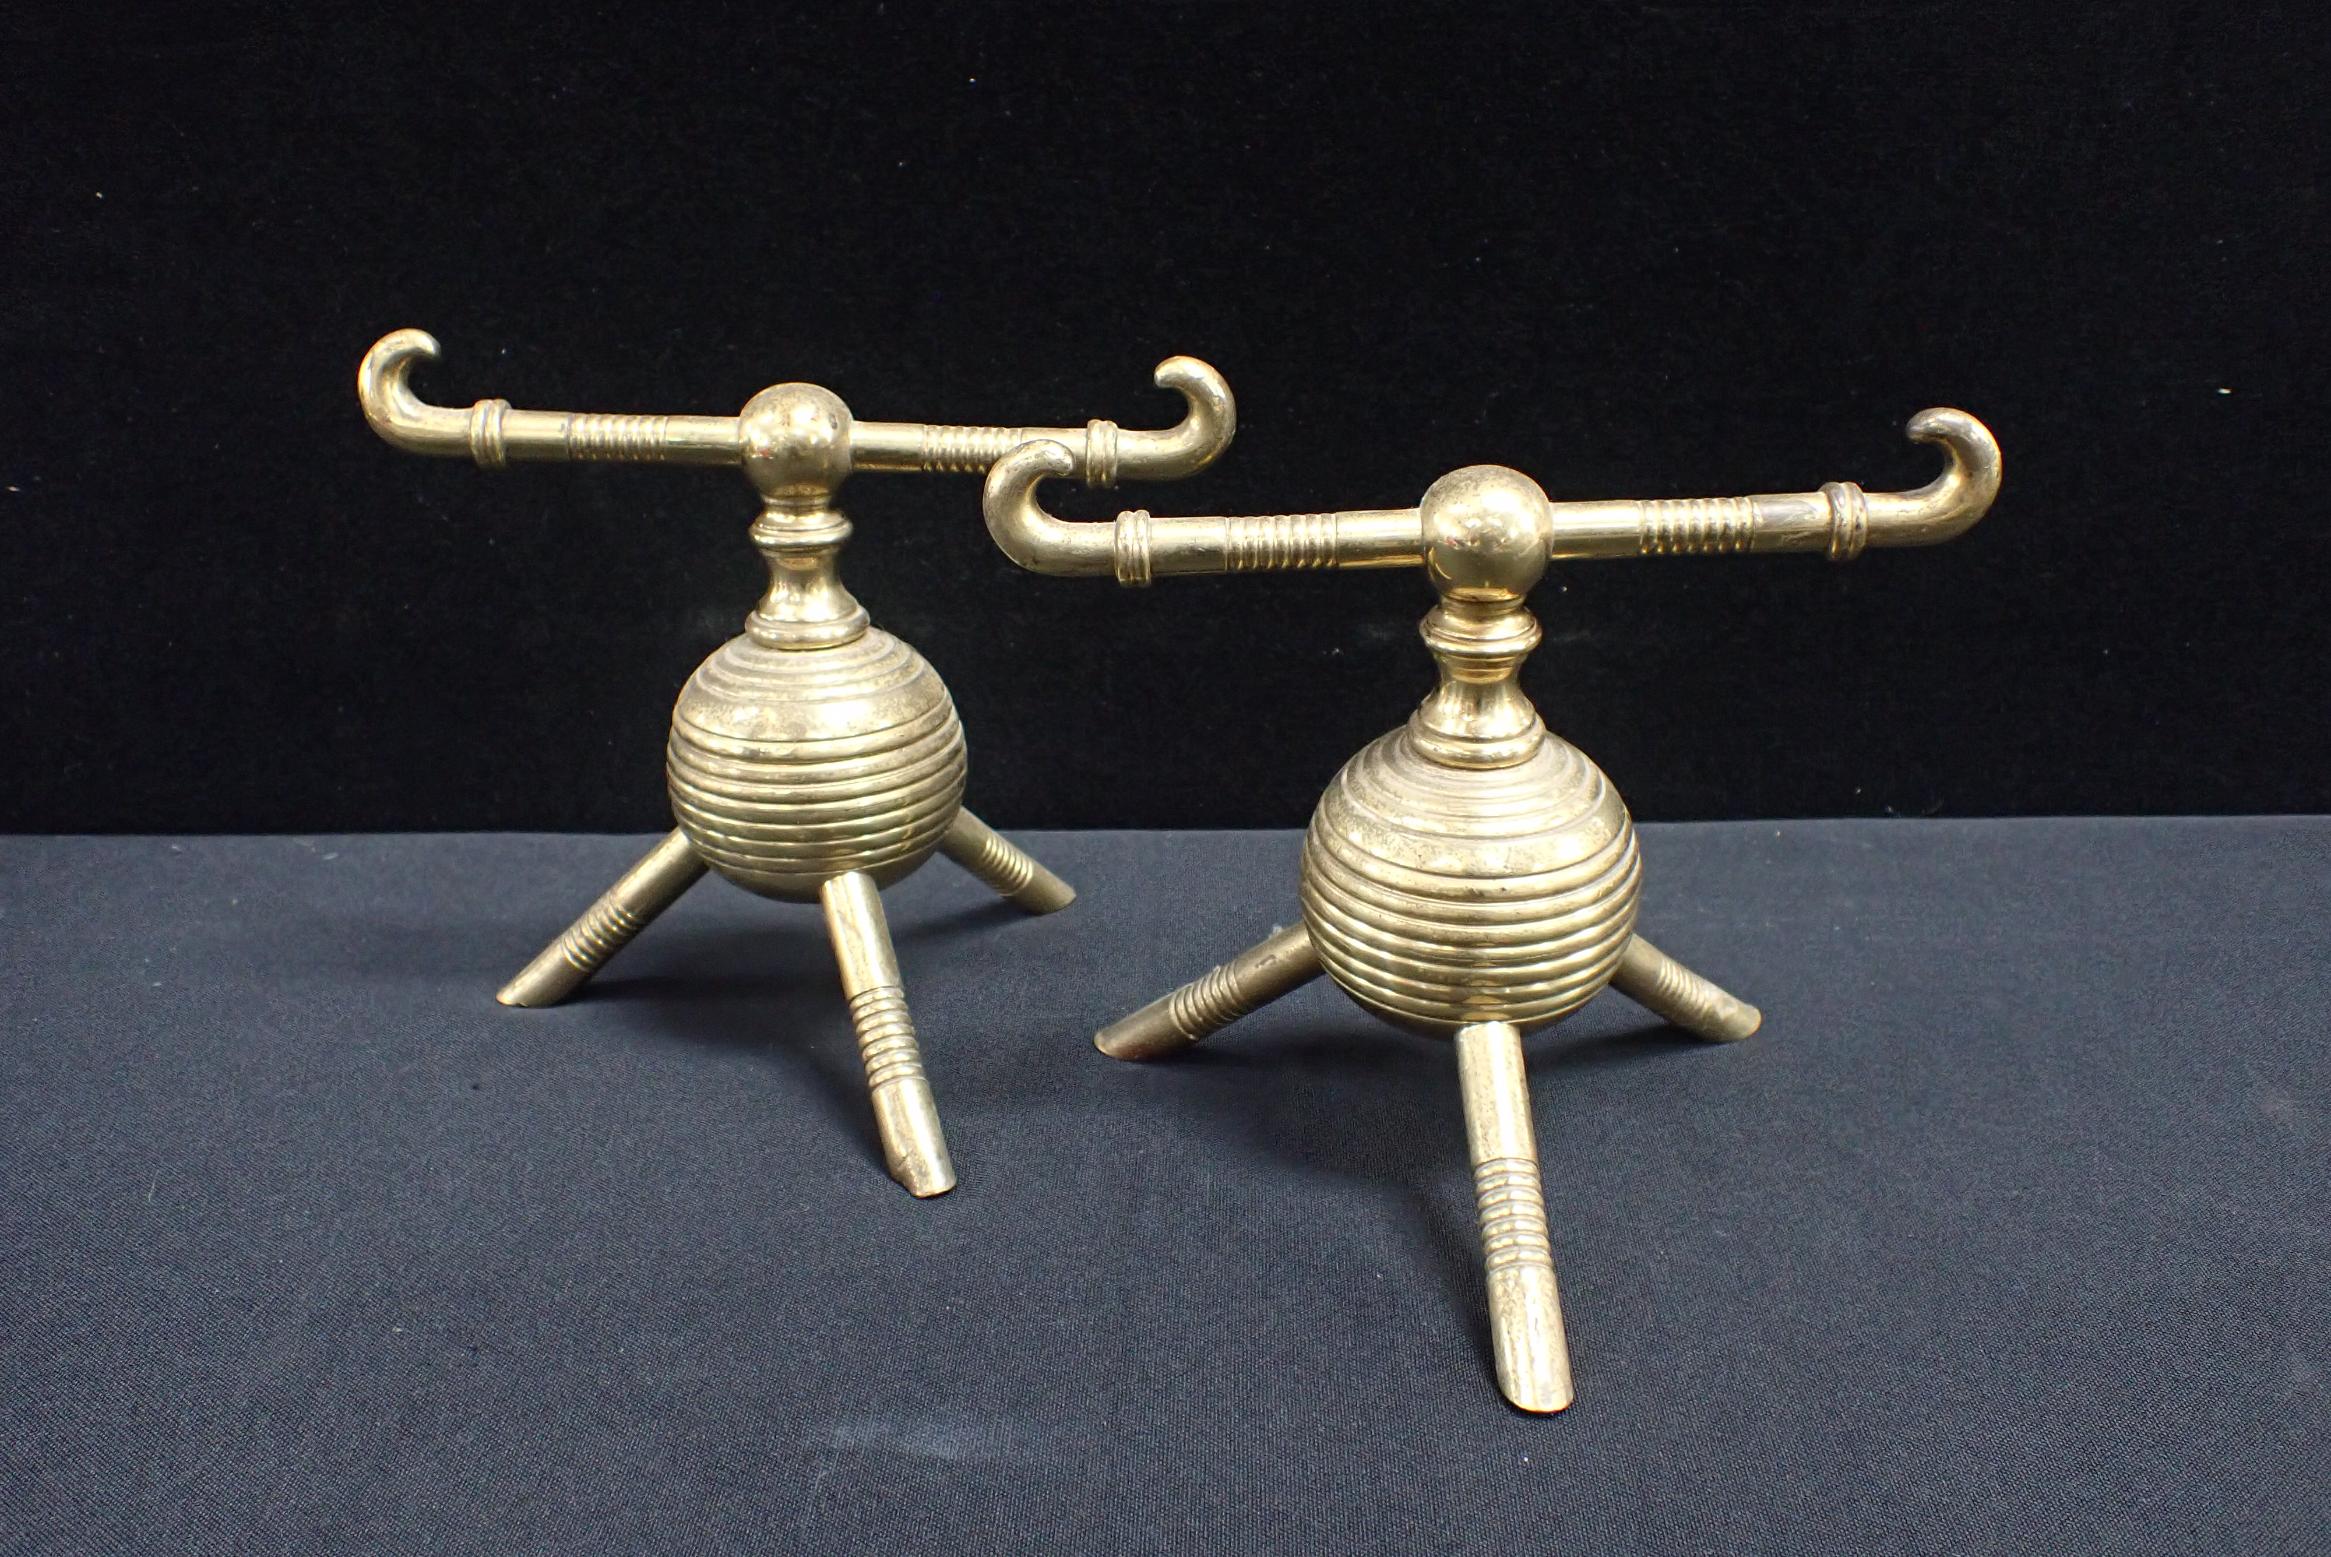 ATTRIBUTED TO DR CHRISTOPHER DRESSER: A PAIR OF BRASS FIRE DOGS